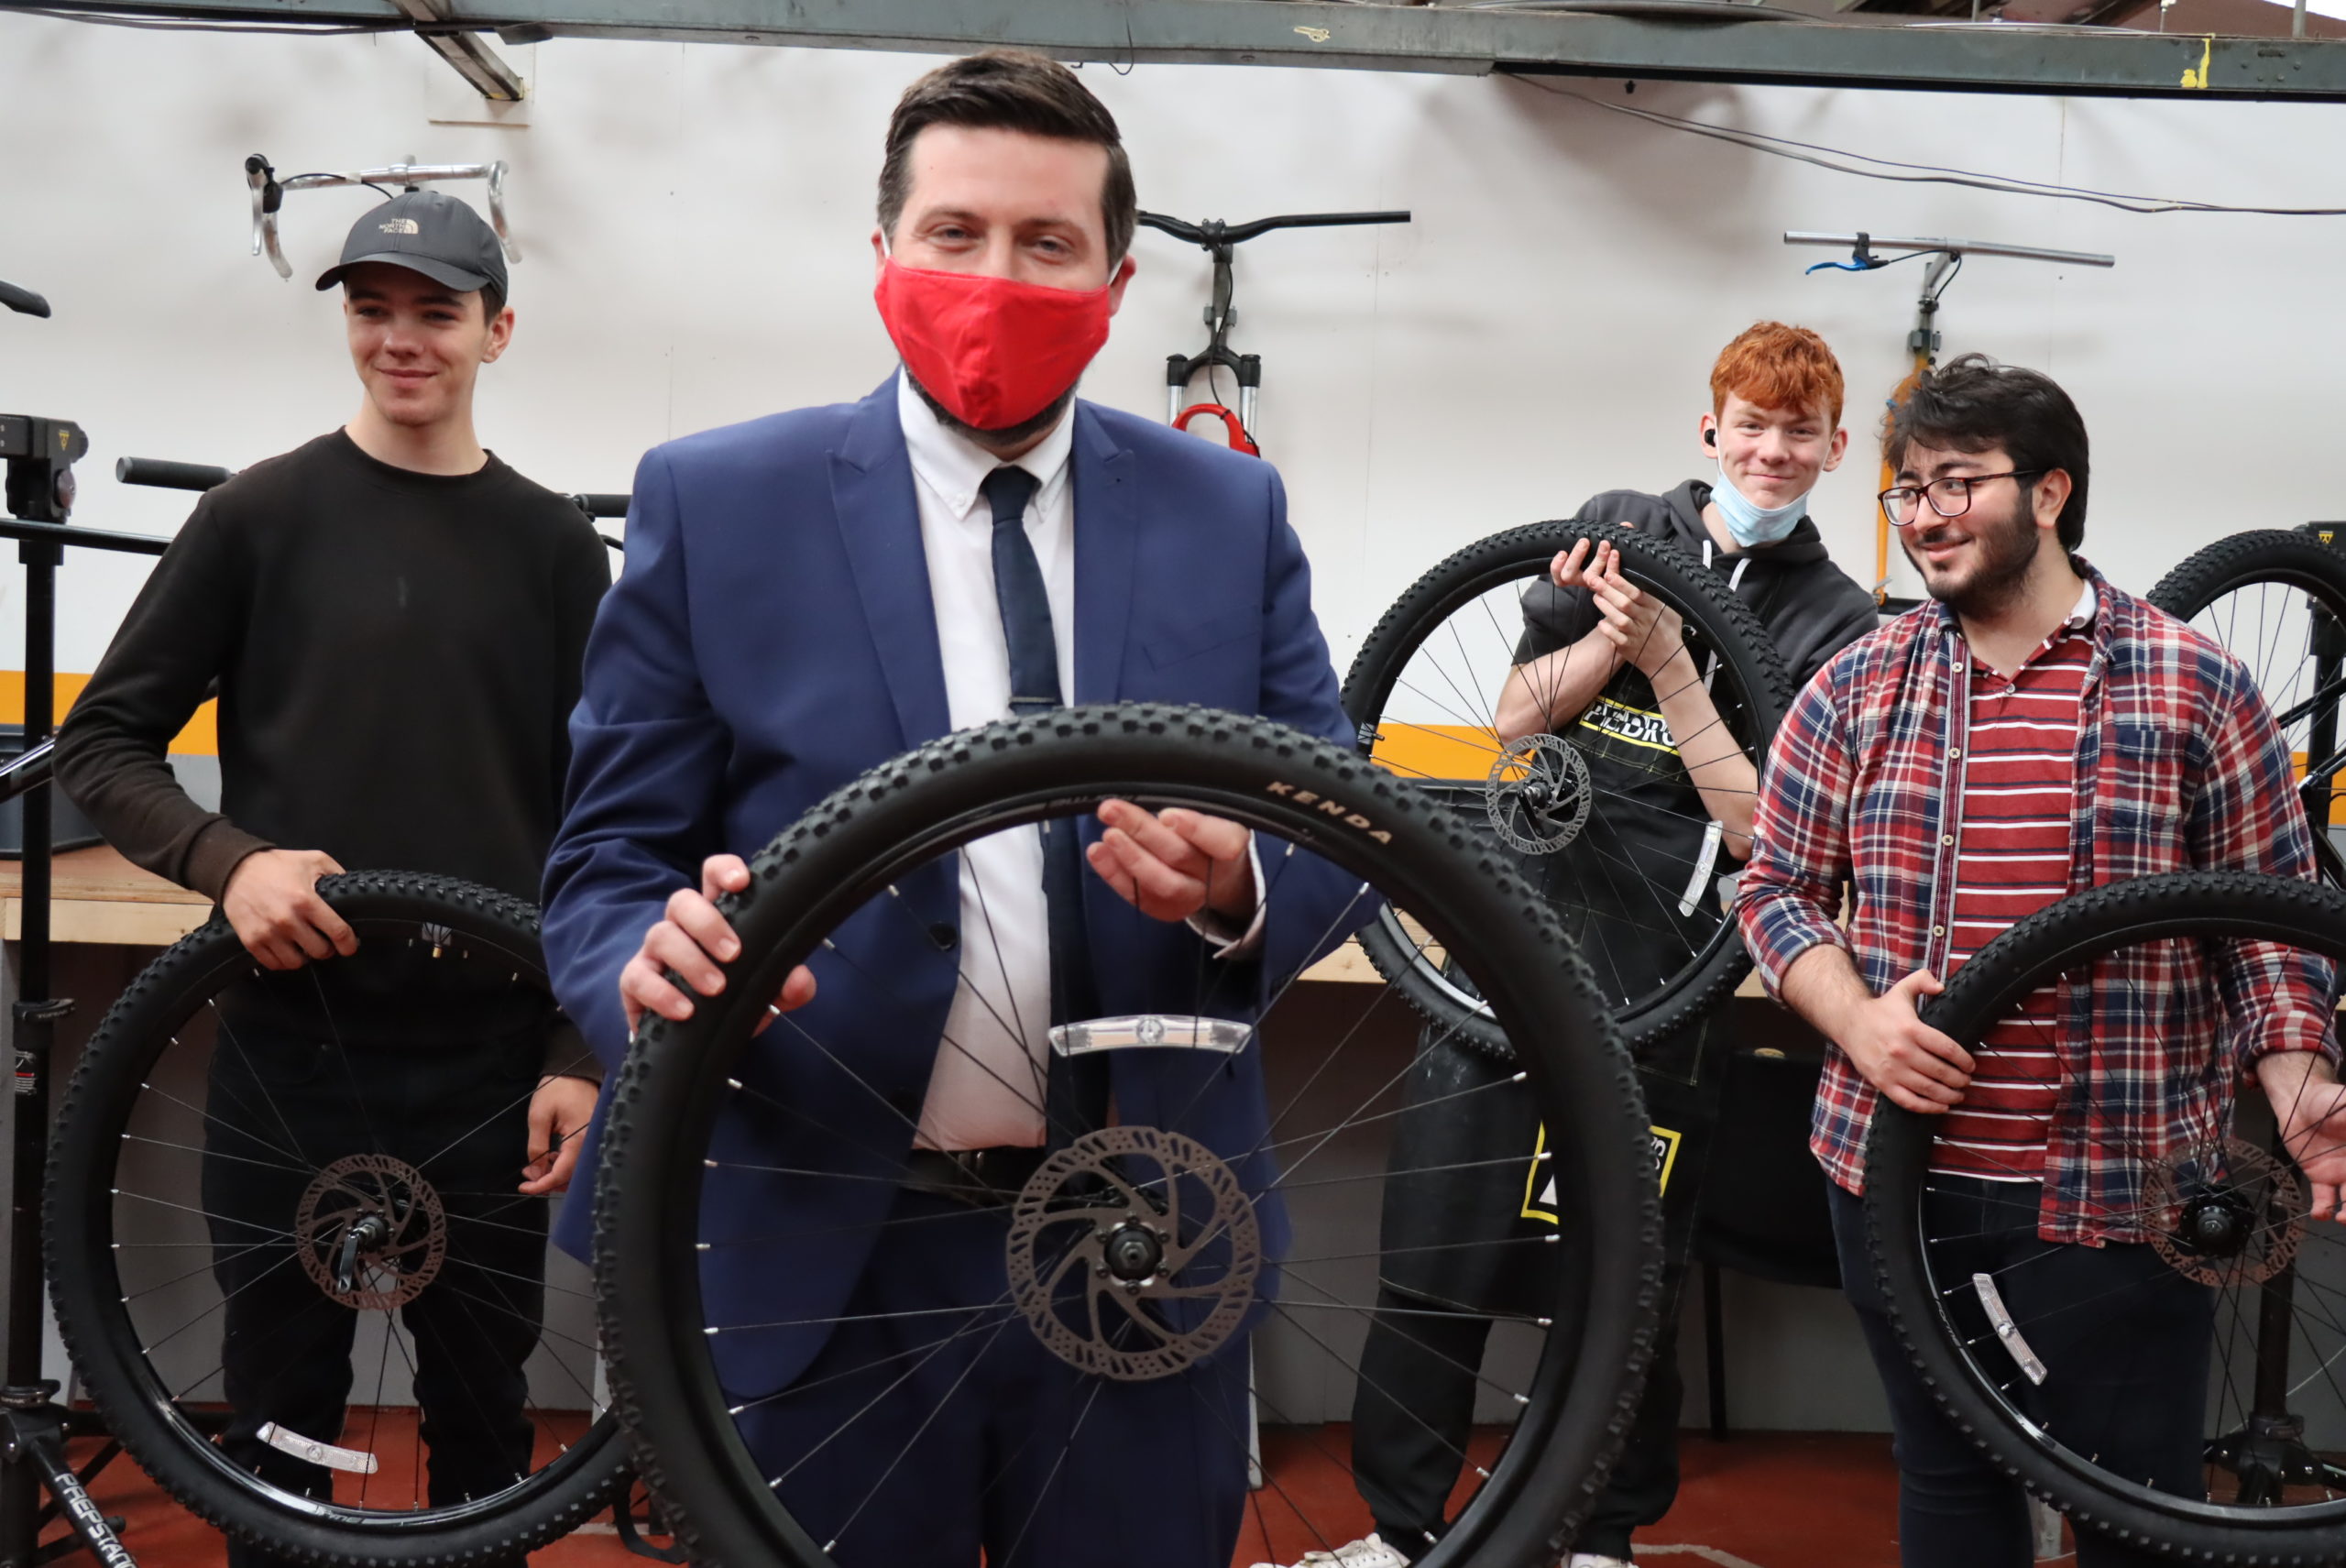 Minister for Youth Employment and Training Jamie Hepburn visits Venture Trust